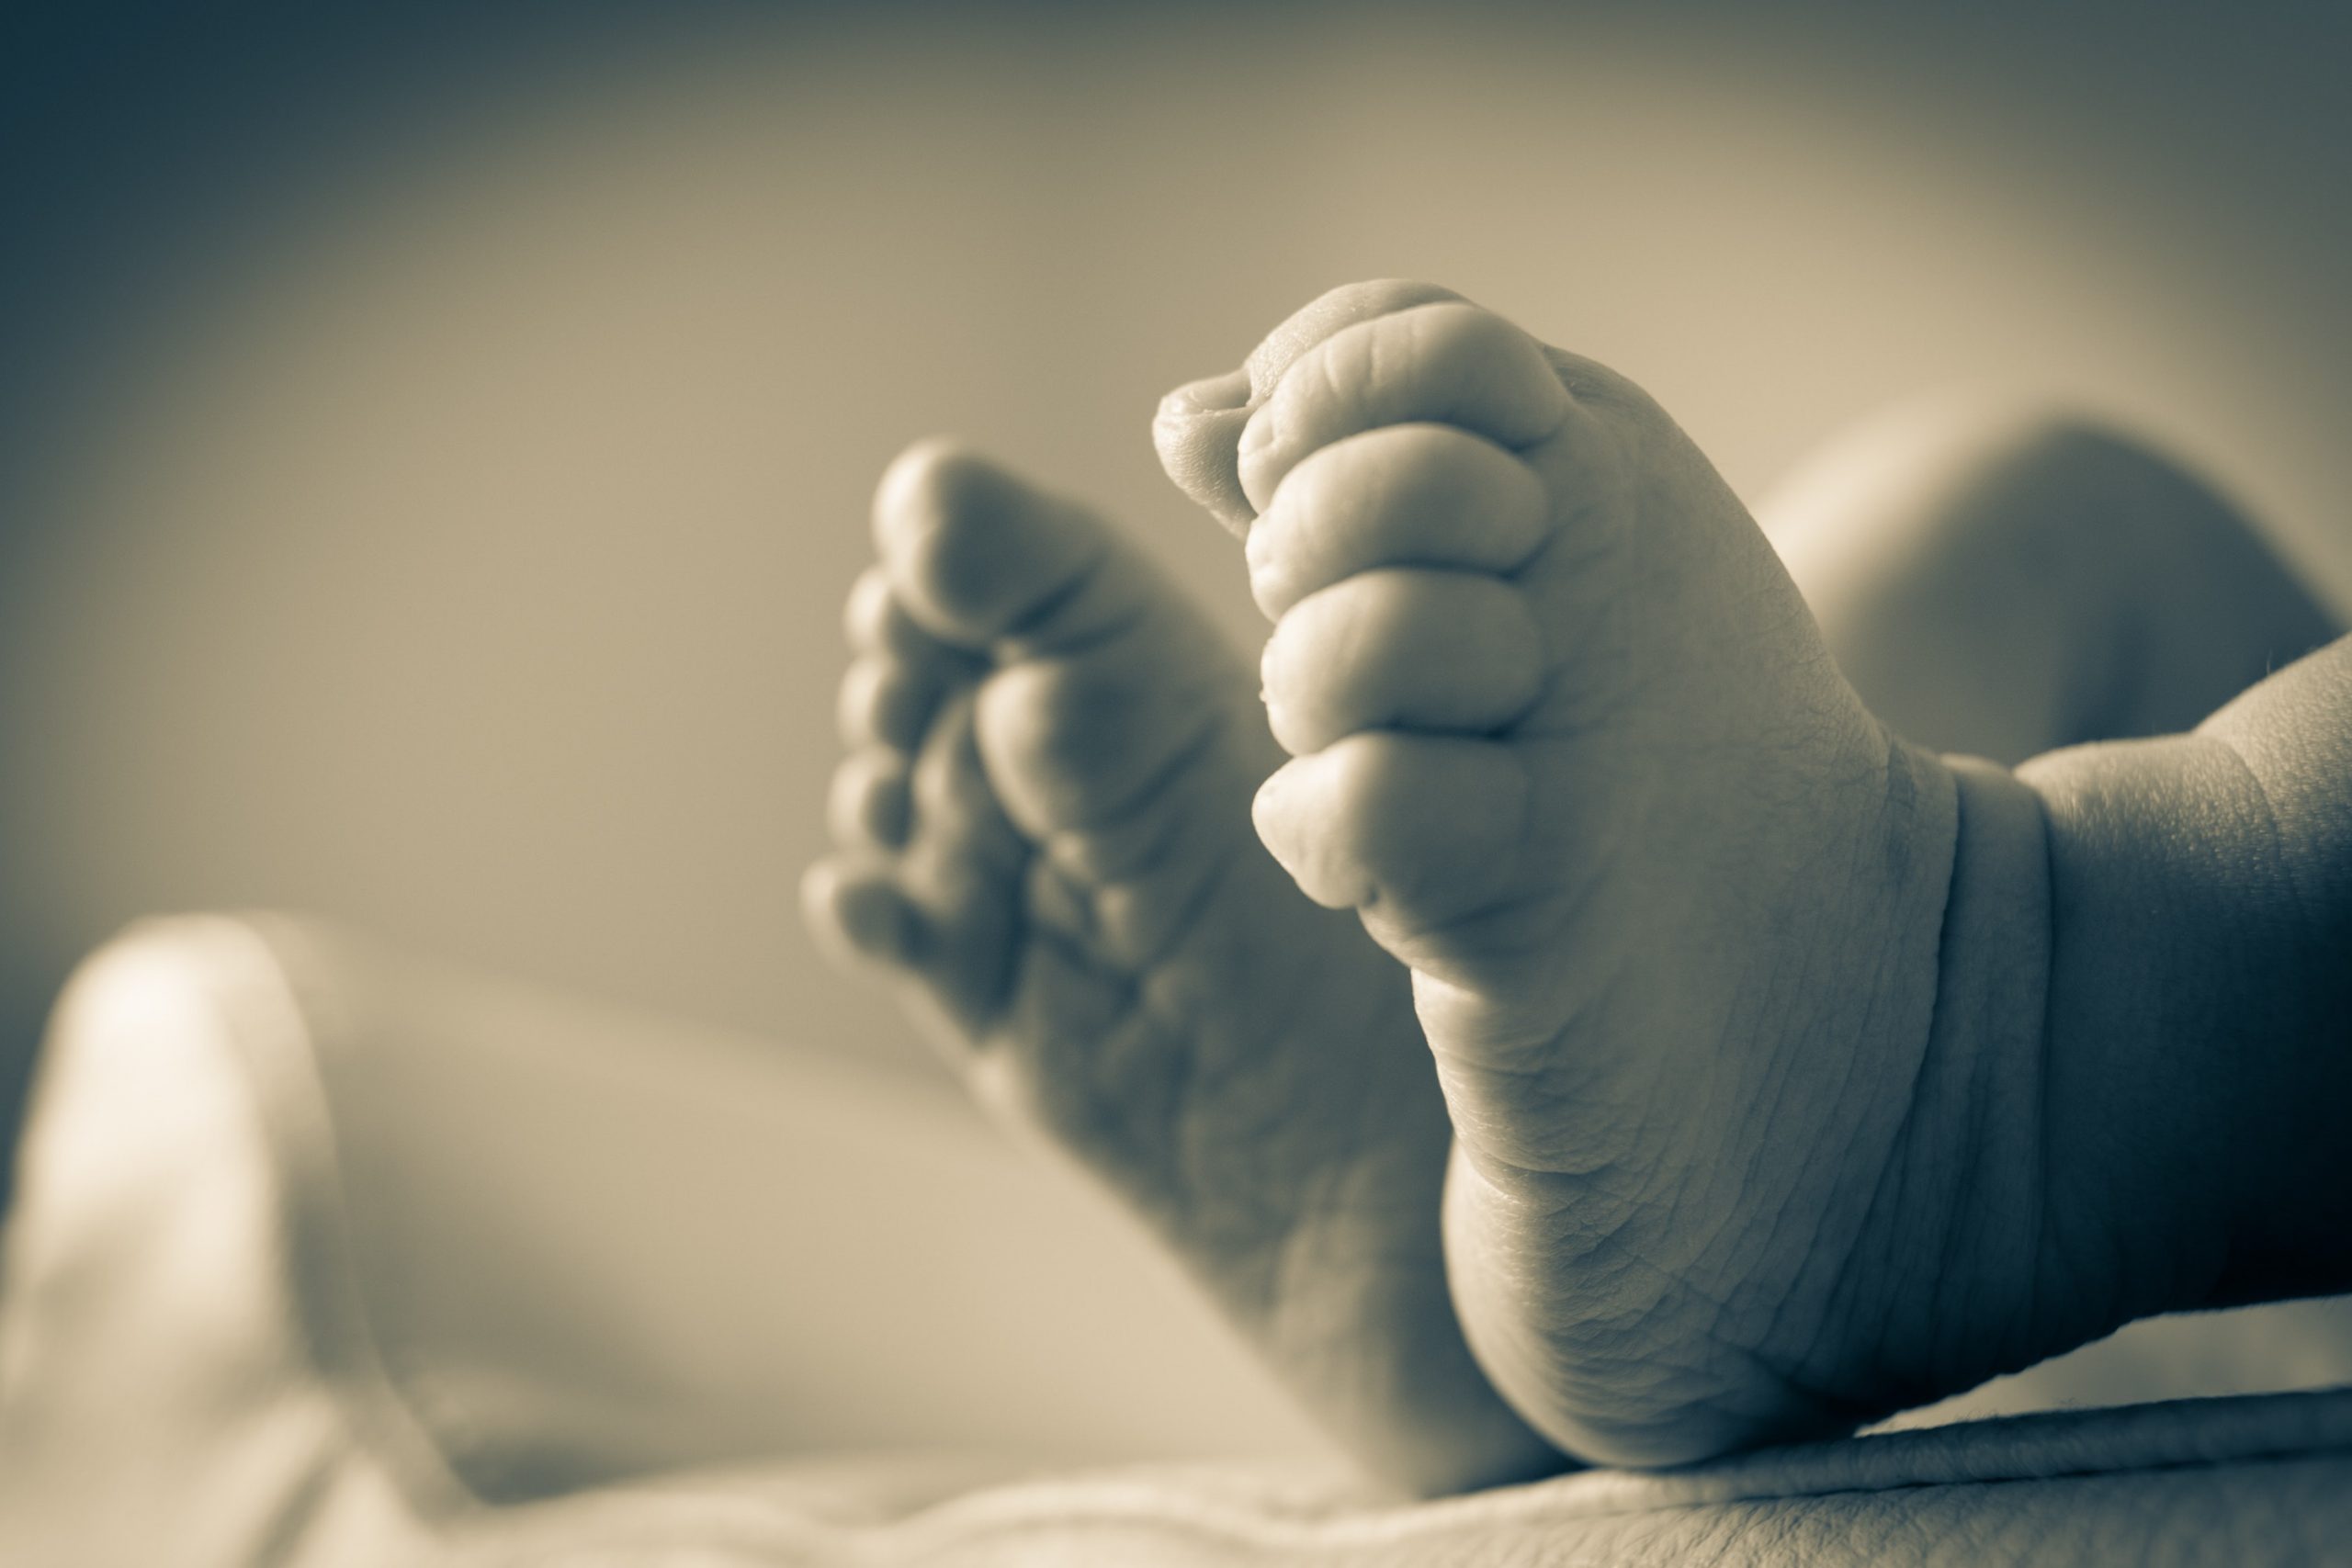 Body of baby discovered near dumpsters in Kuching